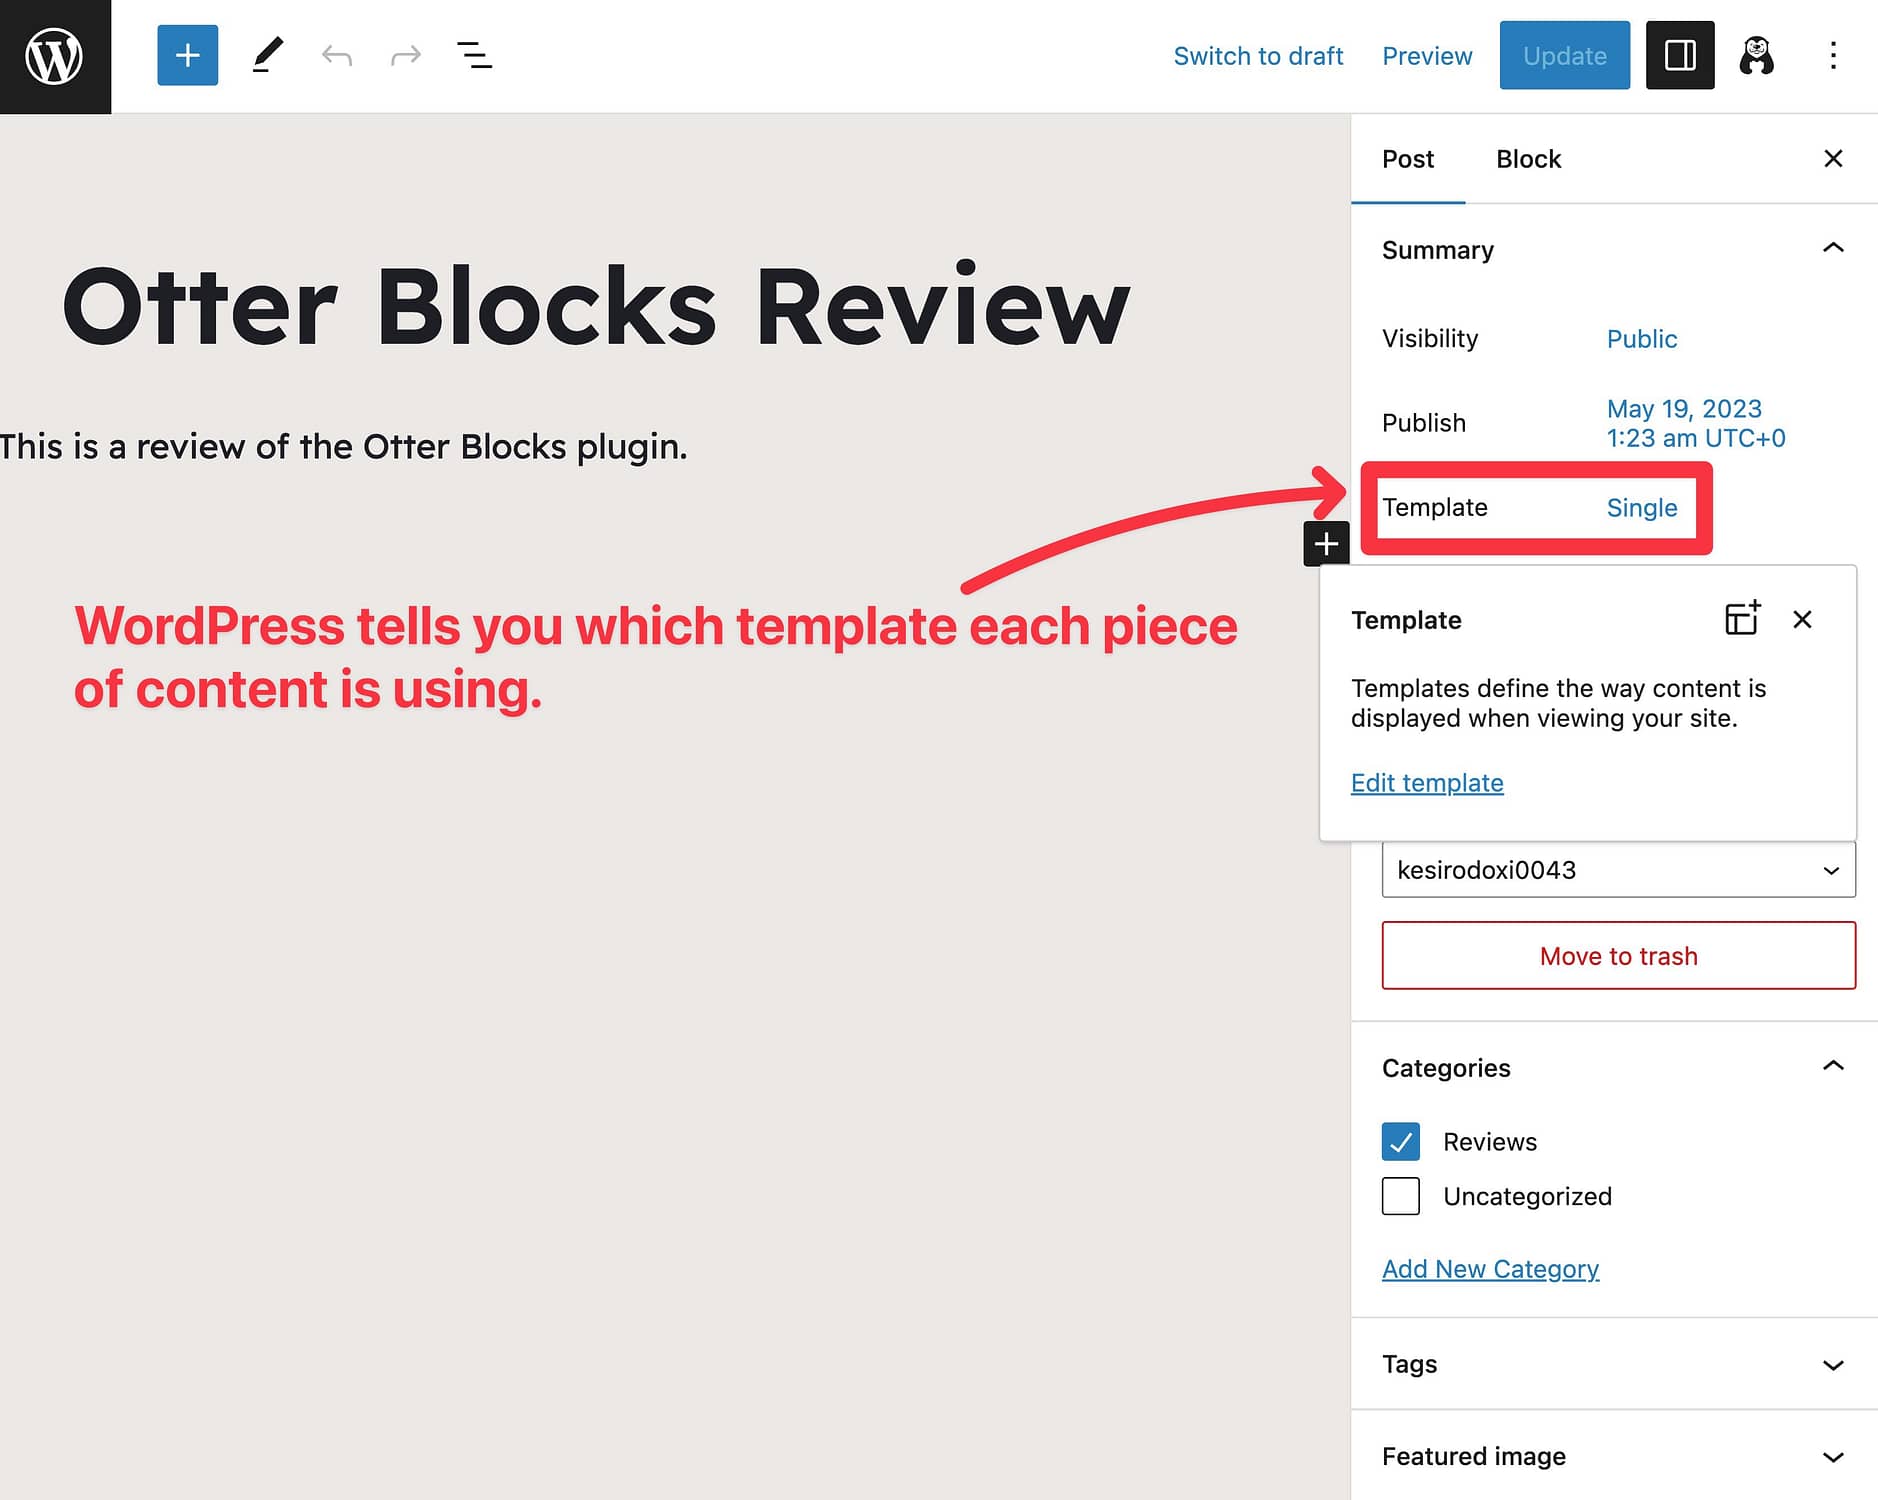 How to check WordPress template in Site Editor.